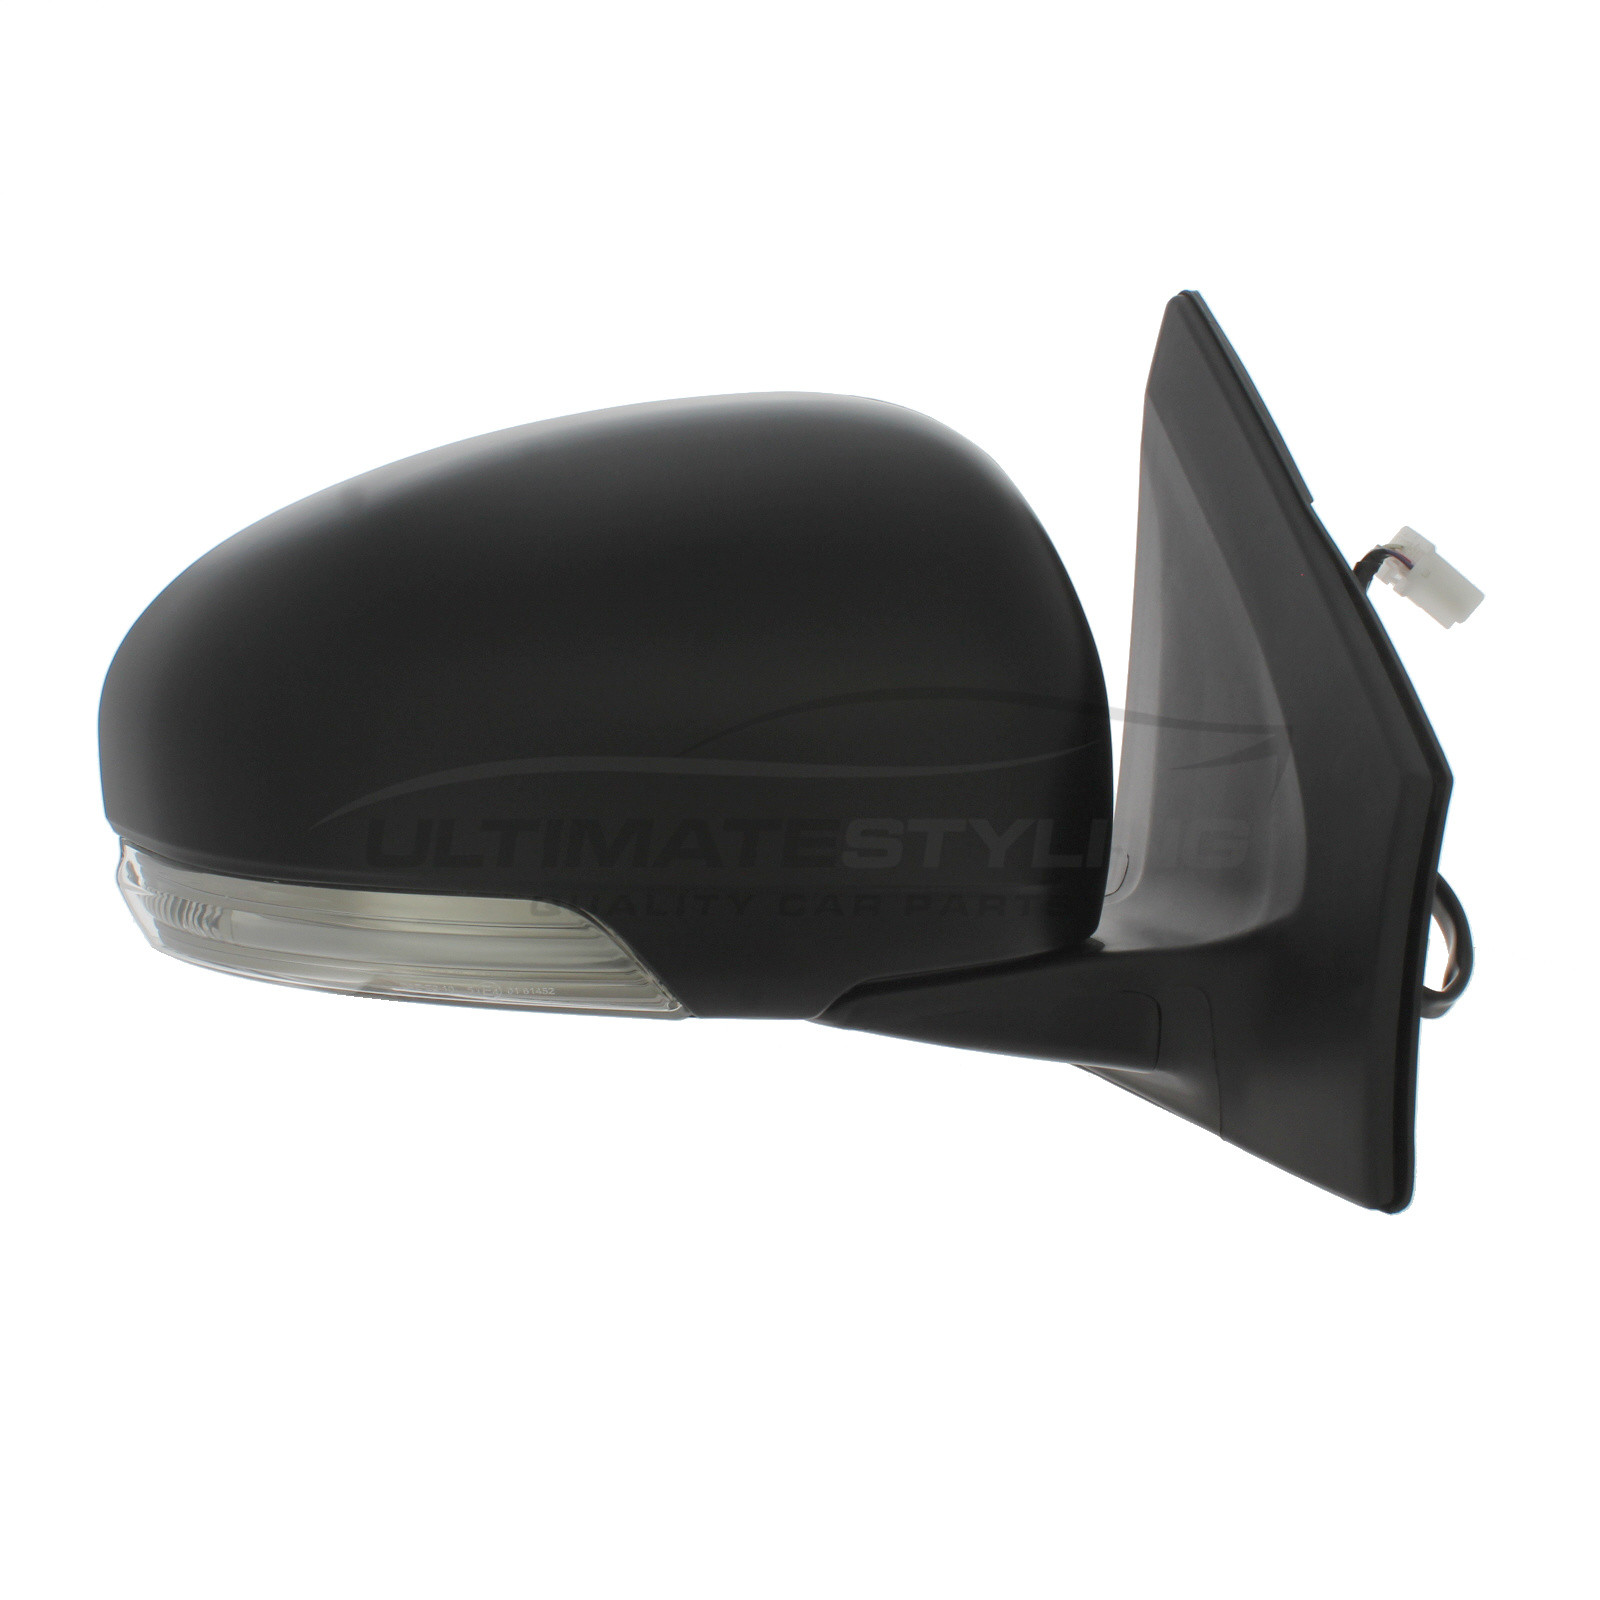 Toyota iQ Wing Mirror / Door Mirror - Drivers Side (RH) - Electric adjustment - Heated Glass - Indicator - Paintable - Black